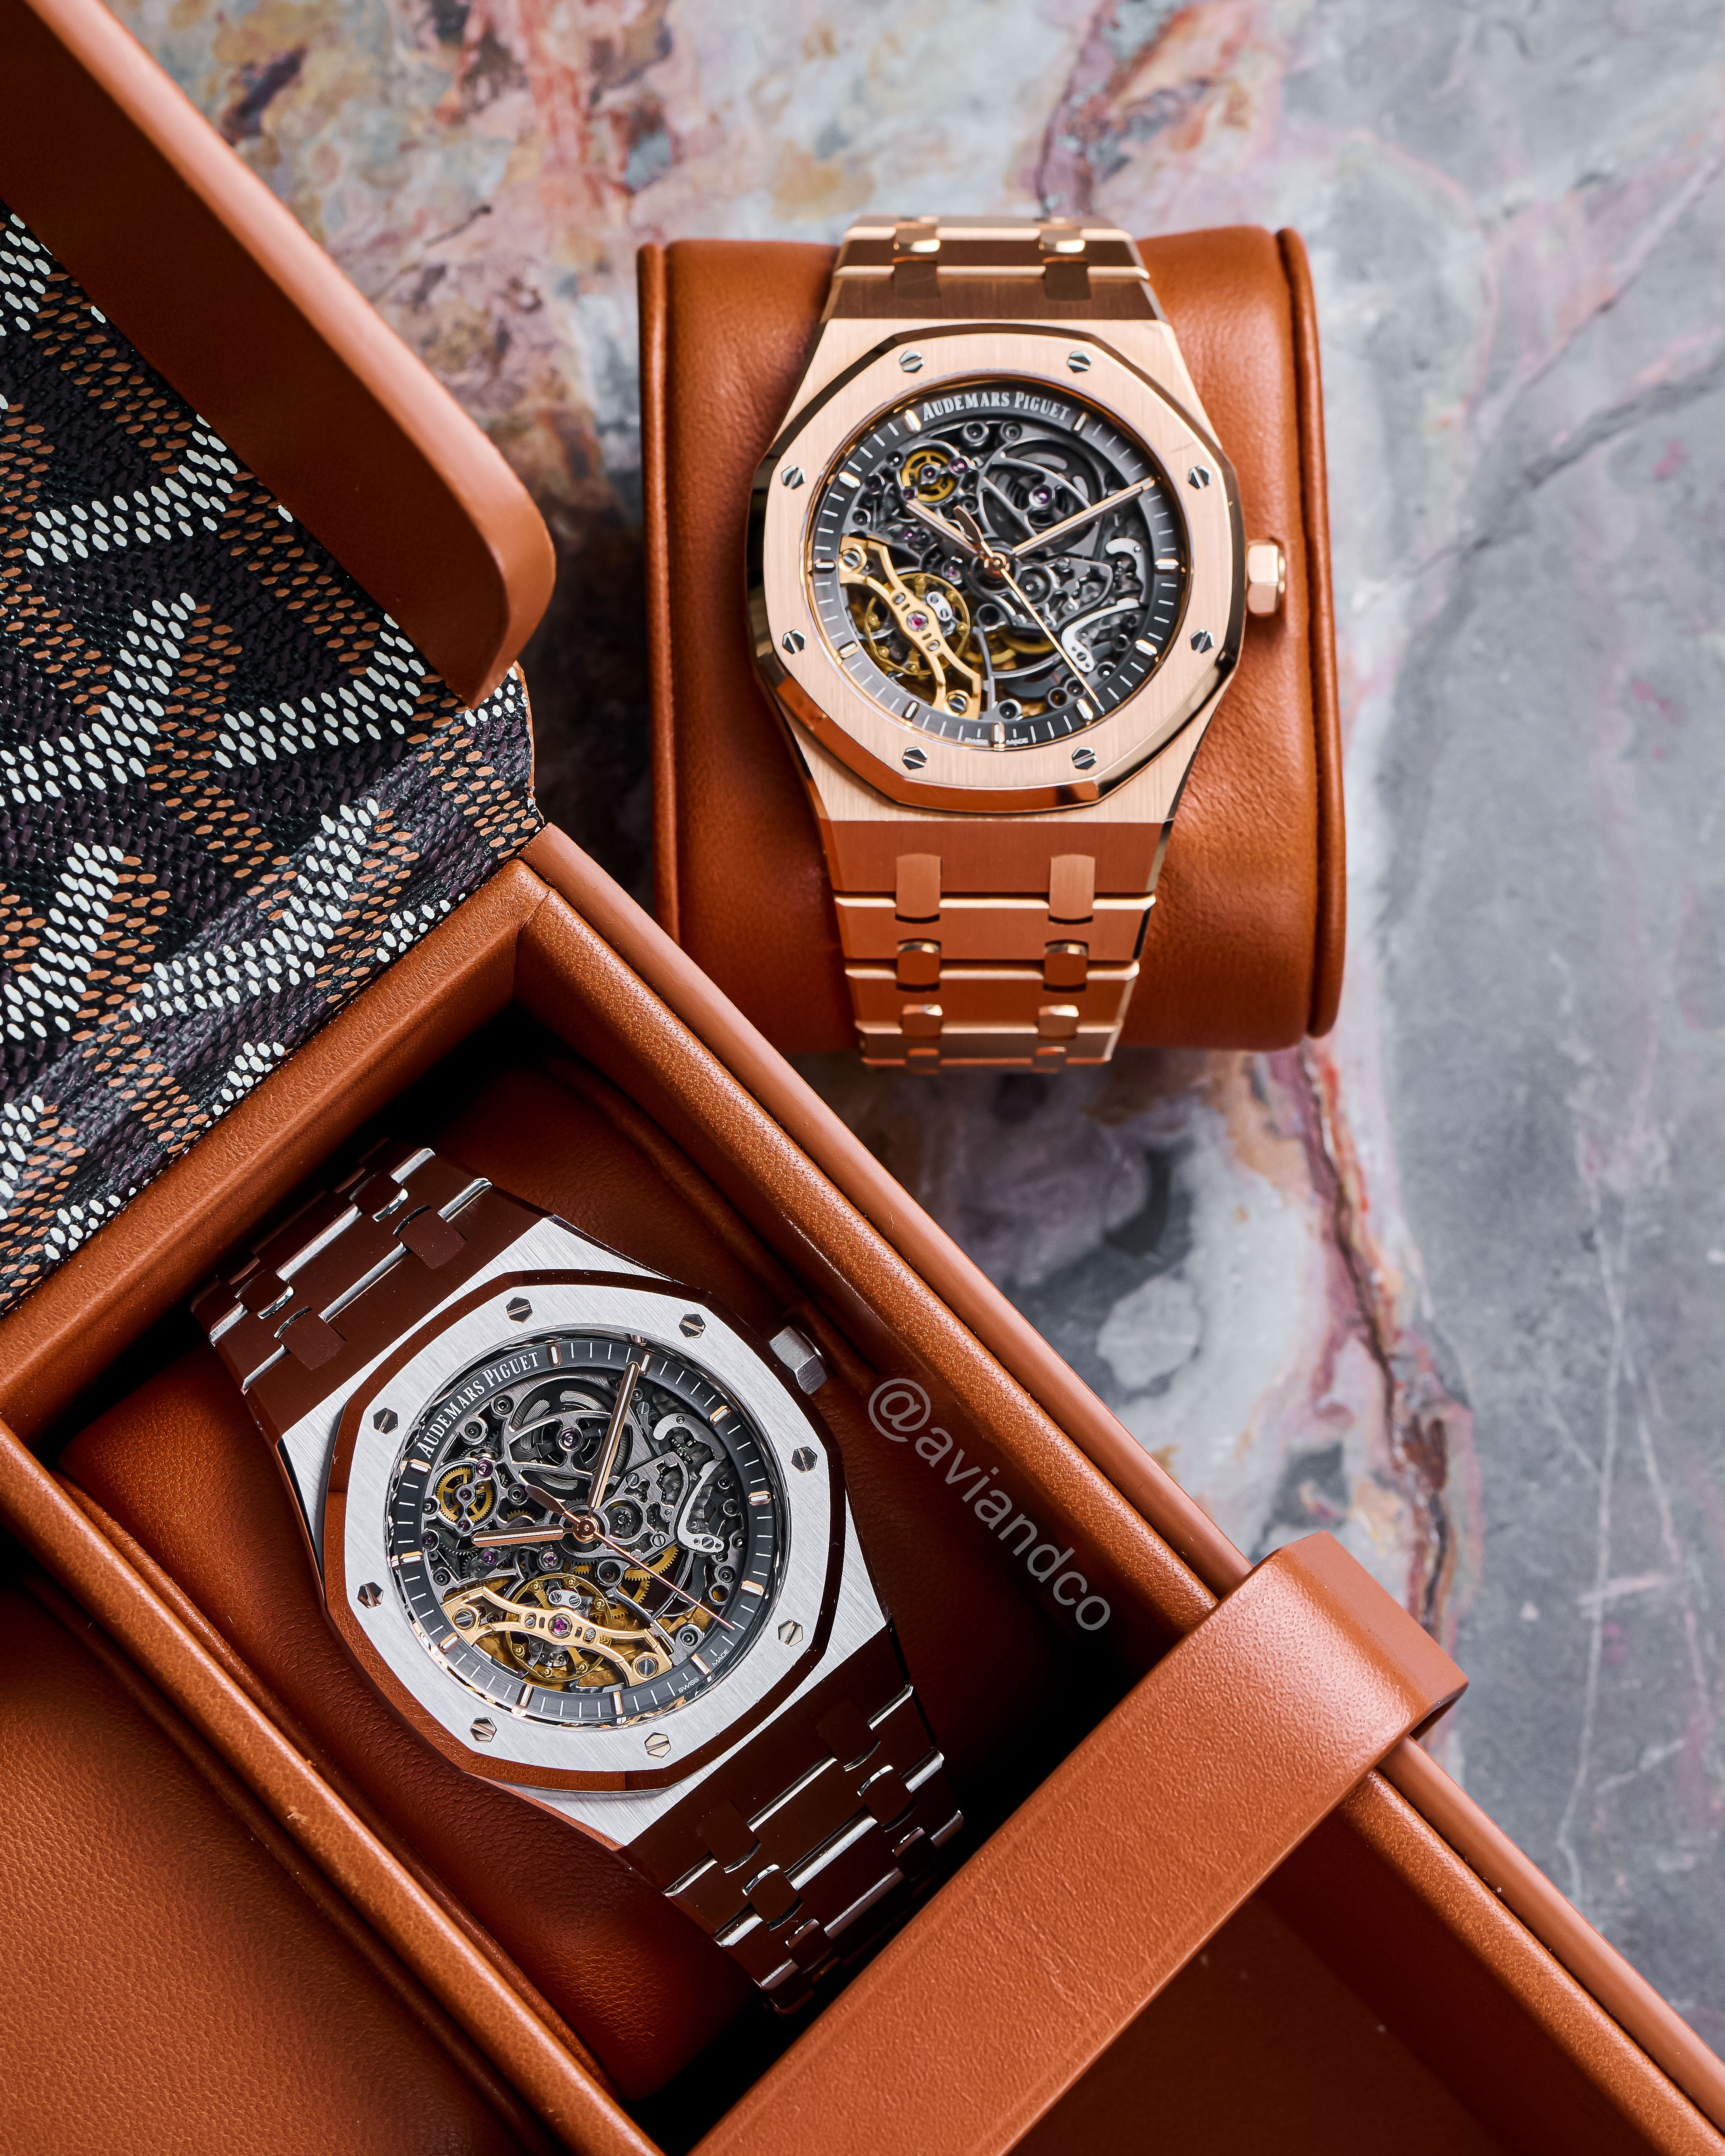 Two Skeleton Dial AP Luxury Watches Displayed on Watch Cushions.